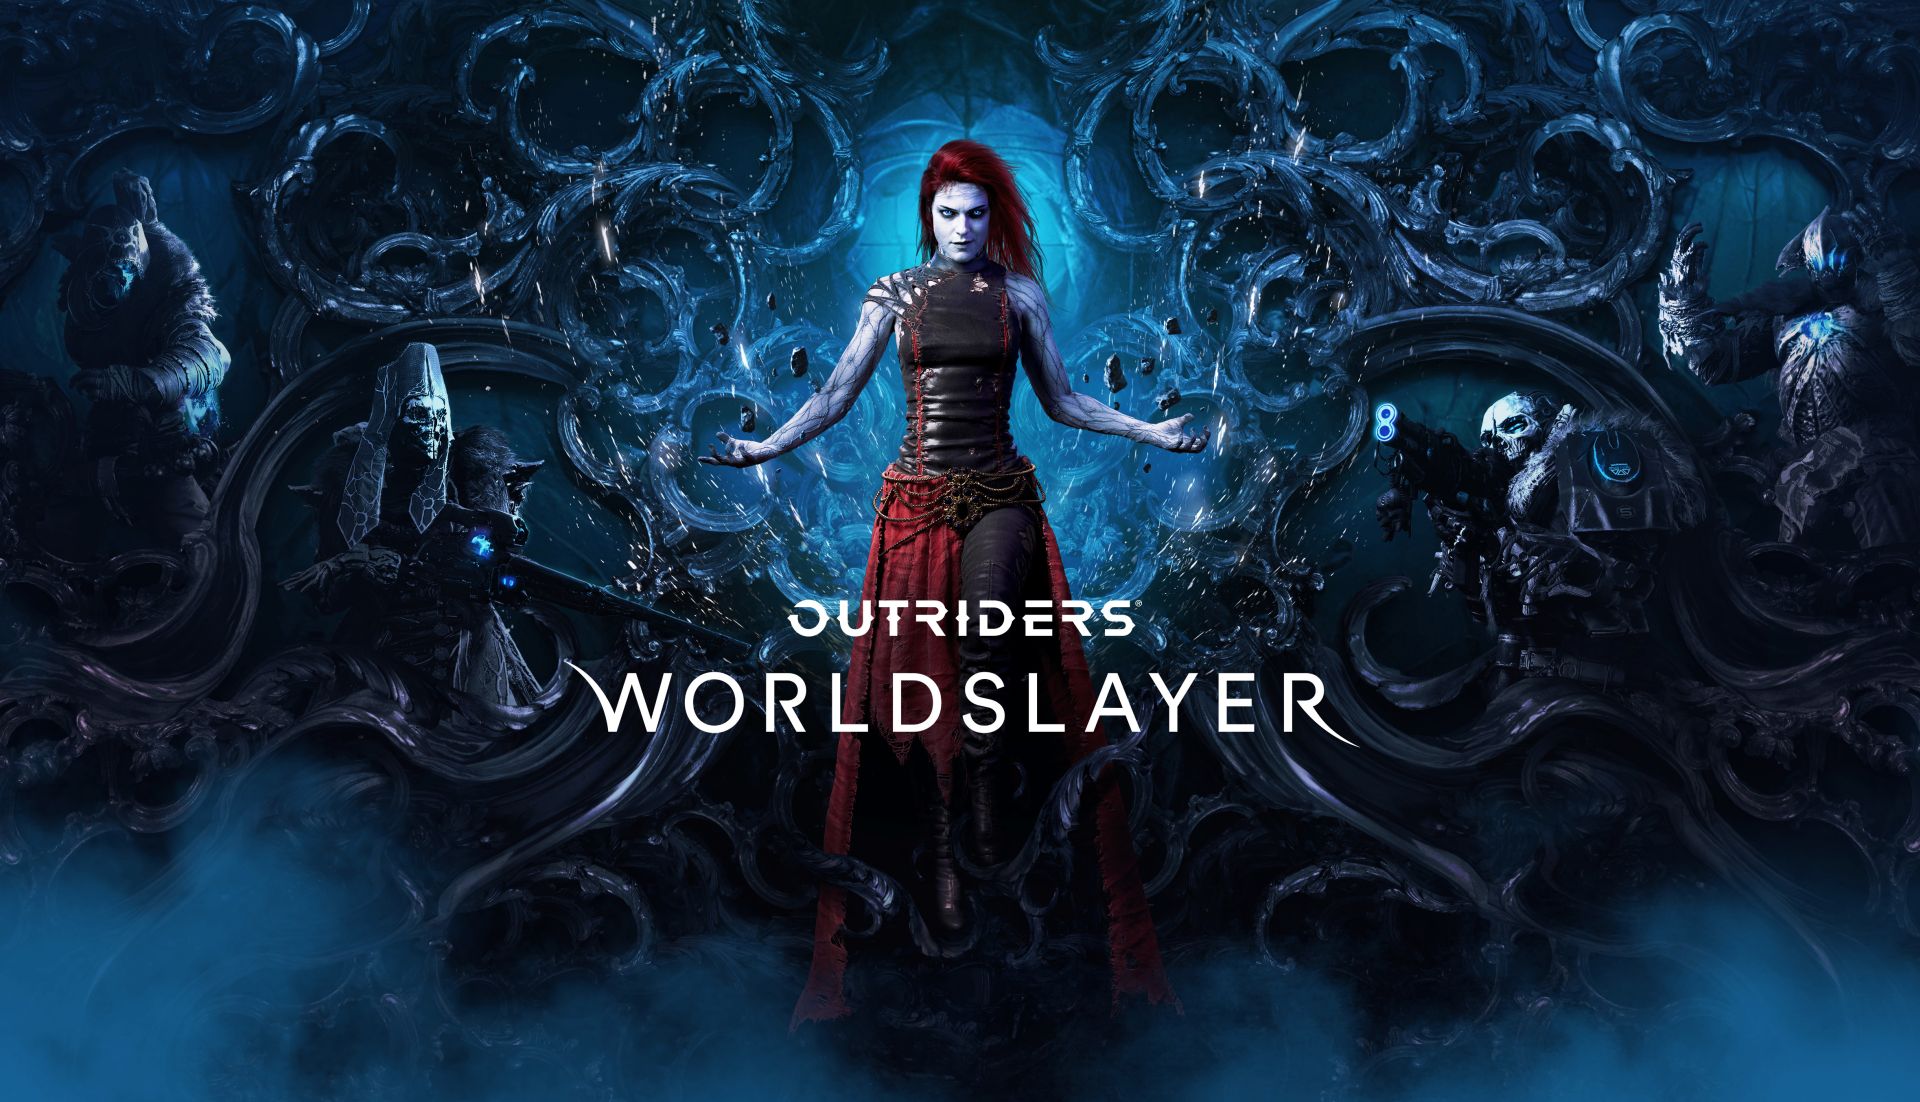 Video For Outriders Worldslayer Revealed